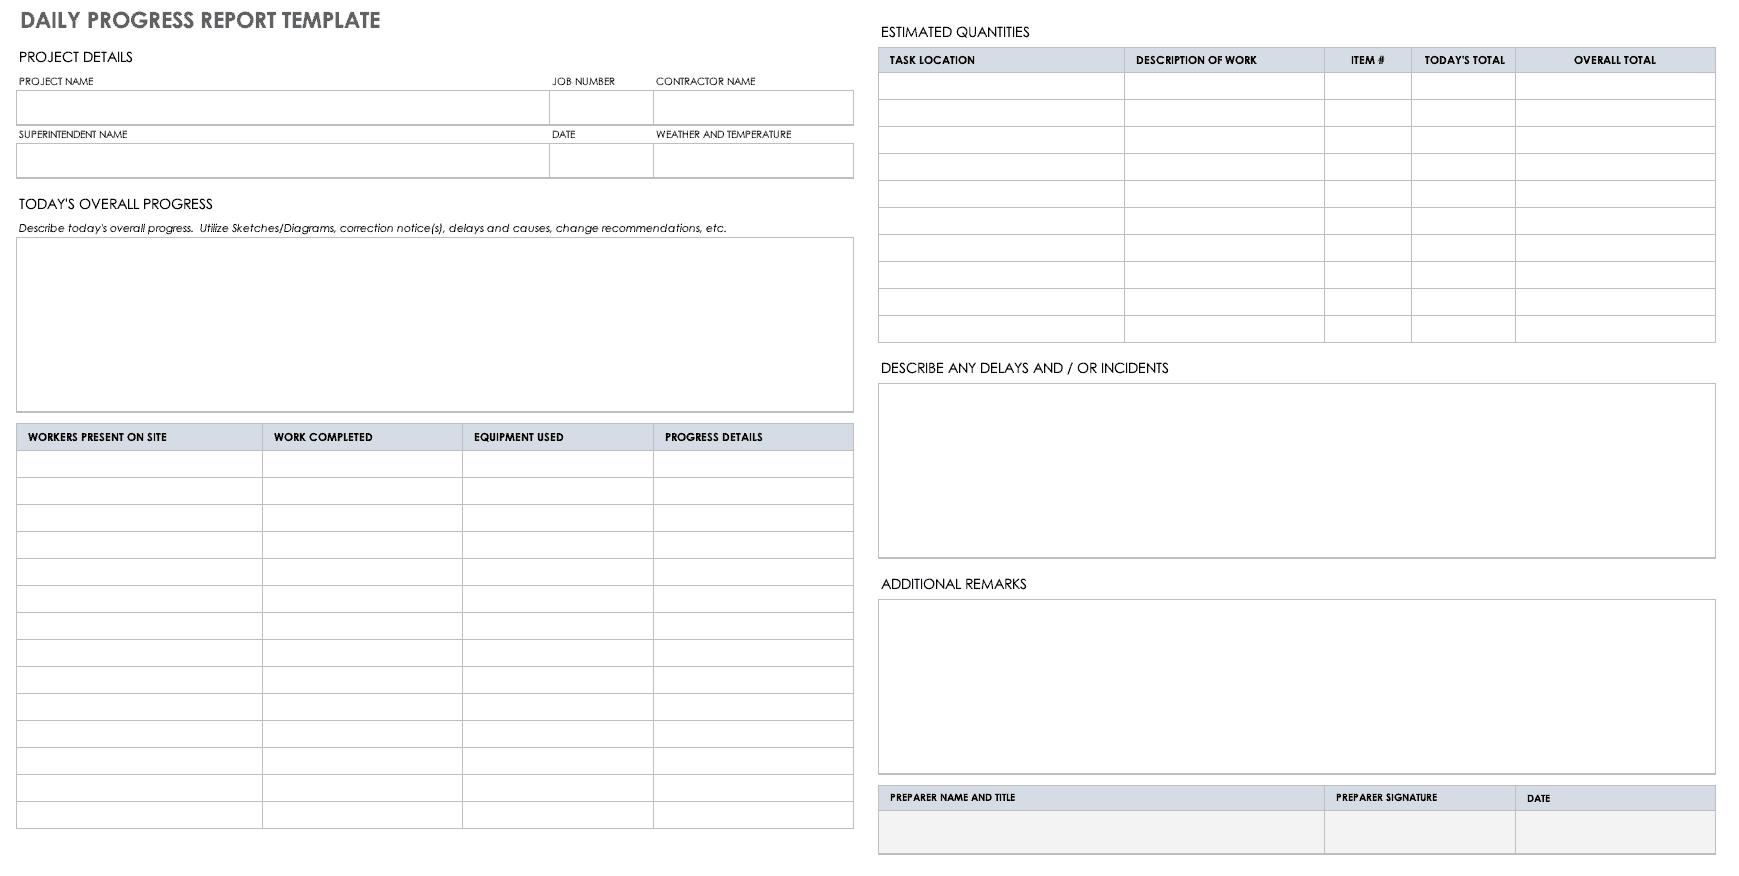 Free Project Report Templates | Smartsheet Within Progress Report Template Doc